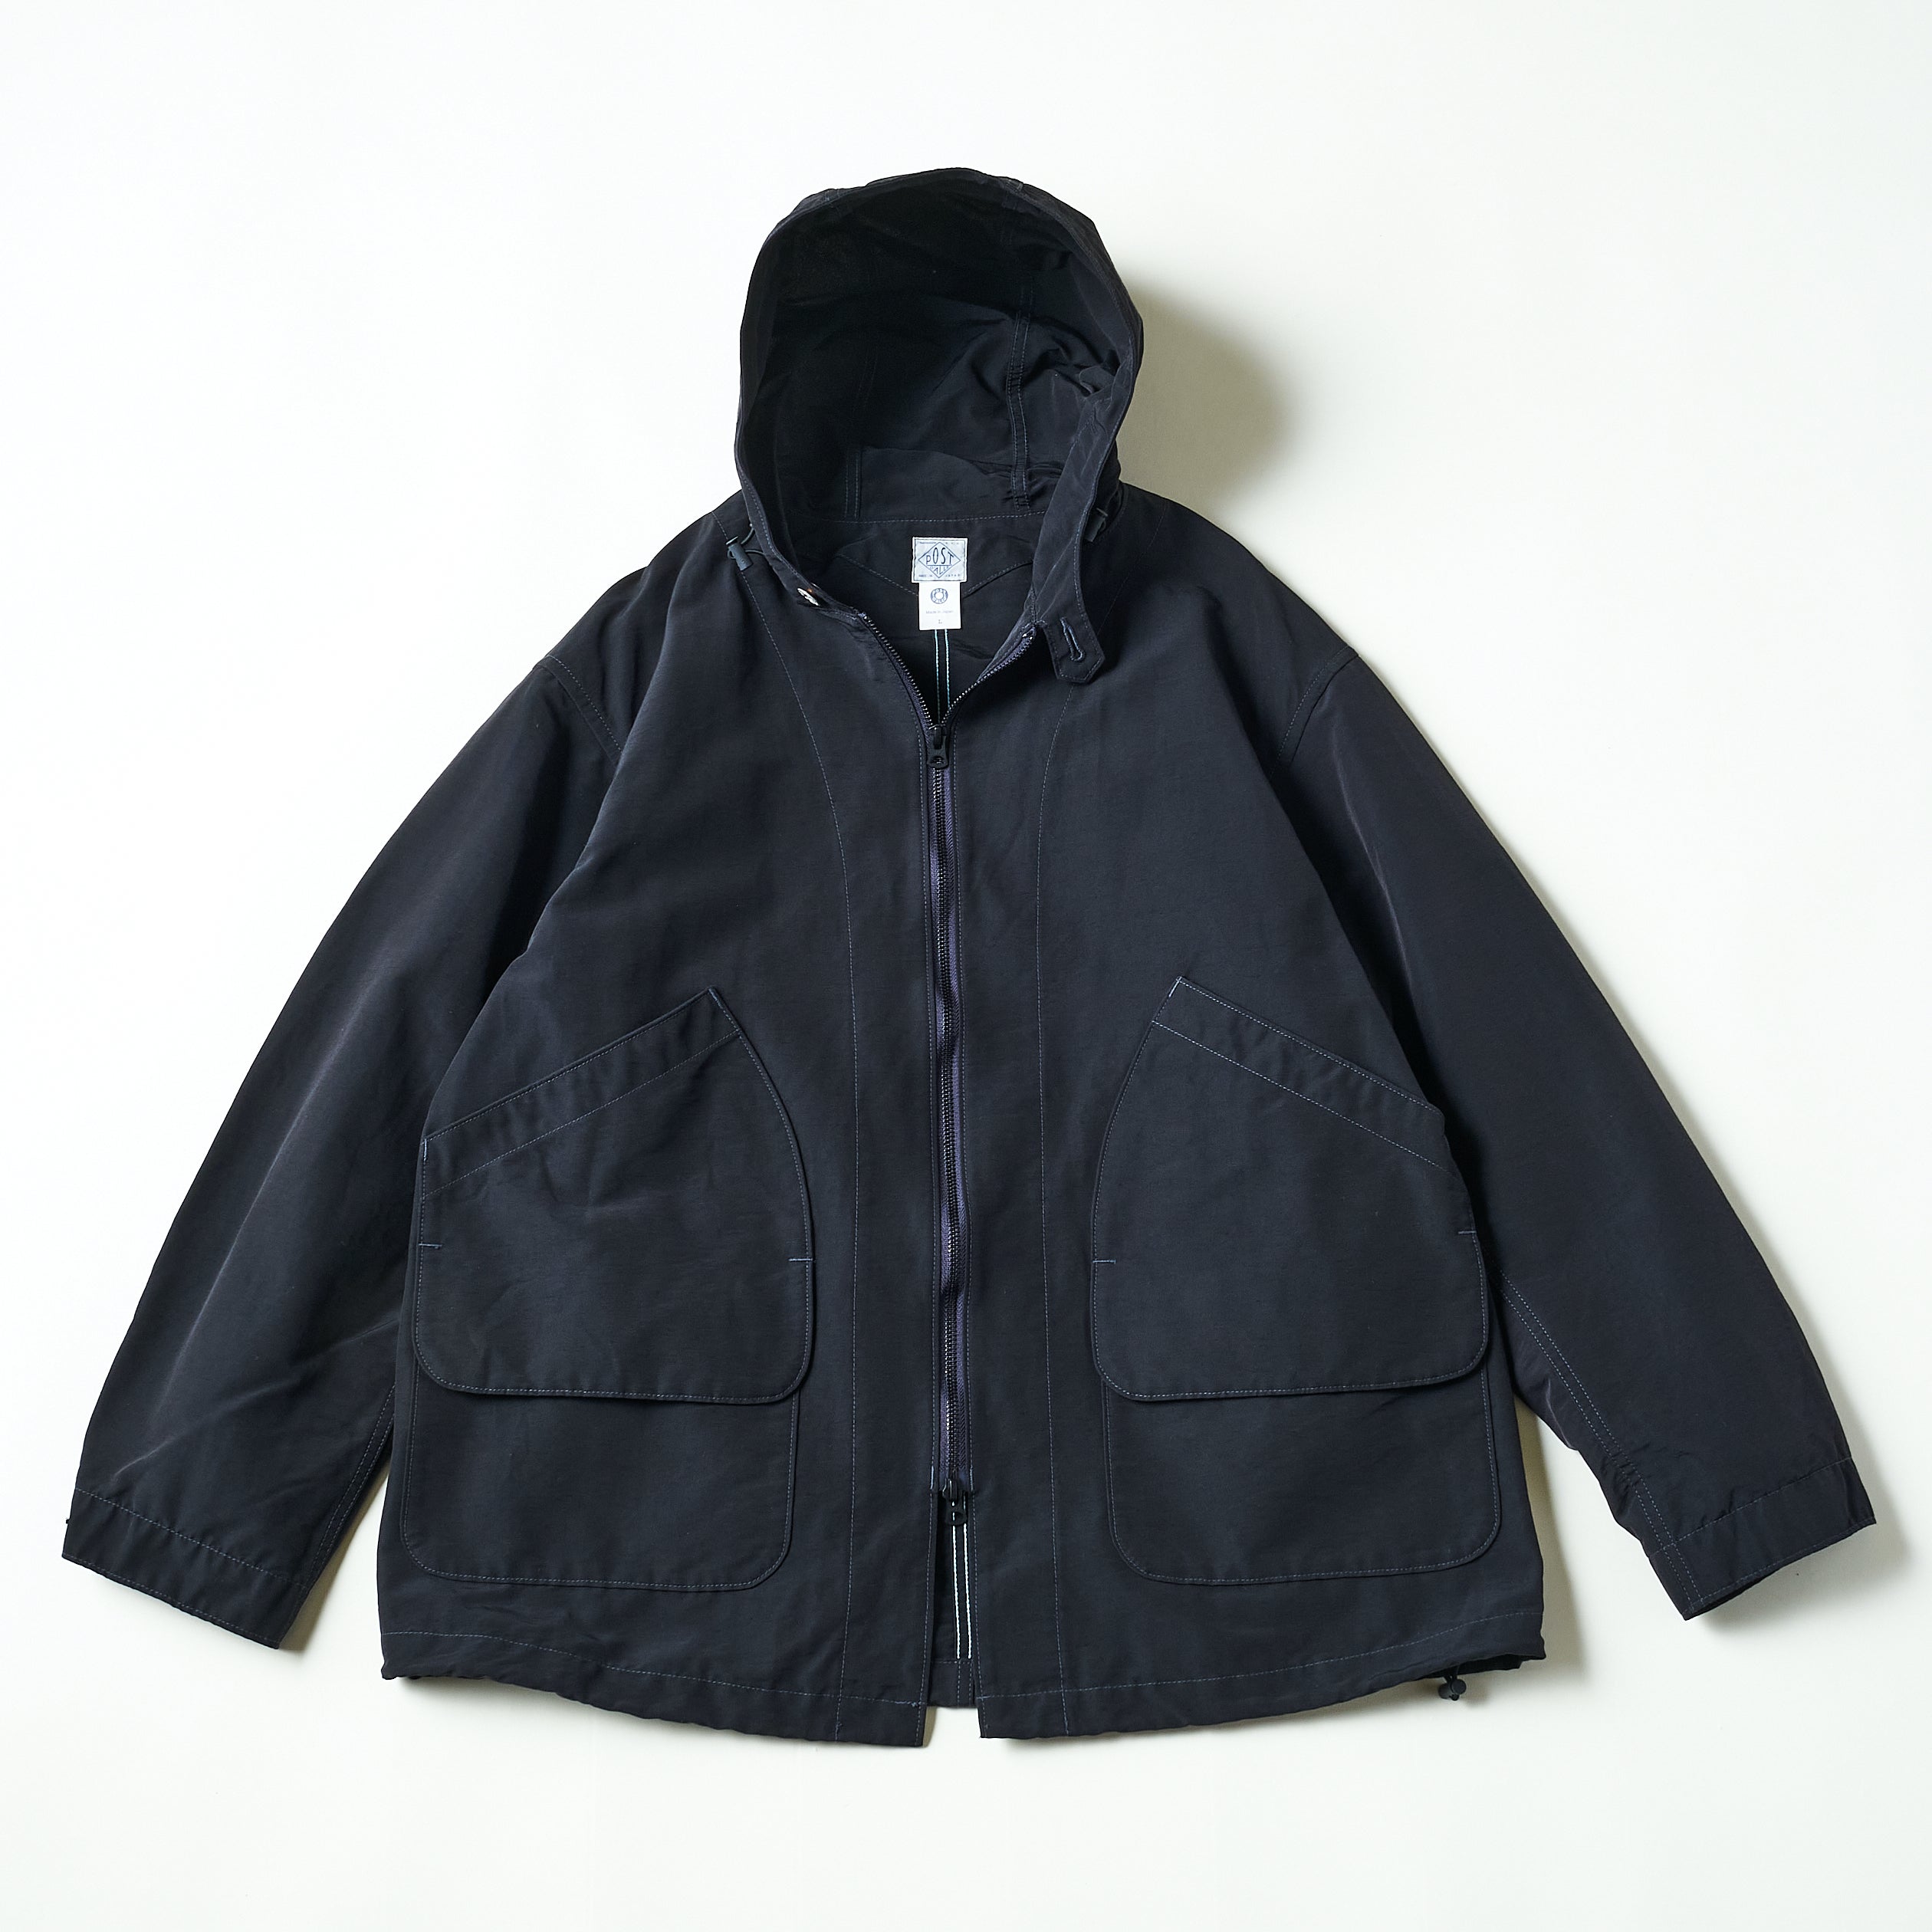 POST OVERALLS DEE'S PARKA made in USA | nate-hospital.com